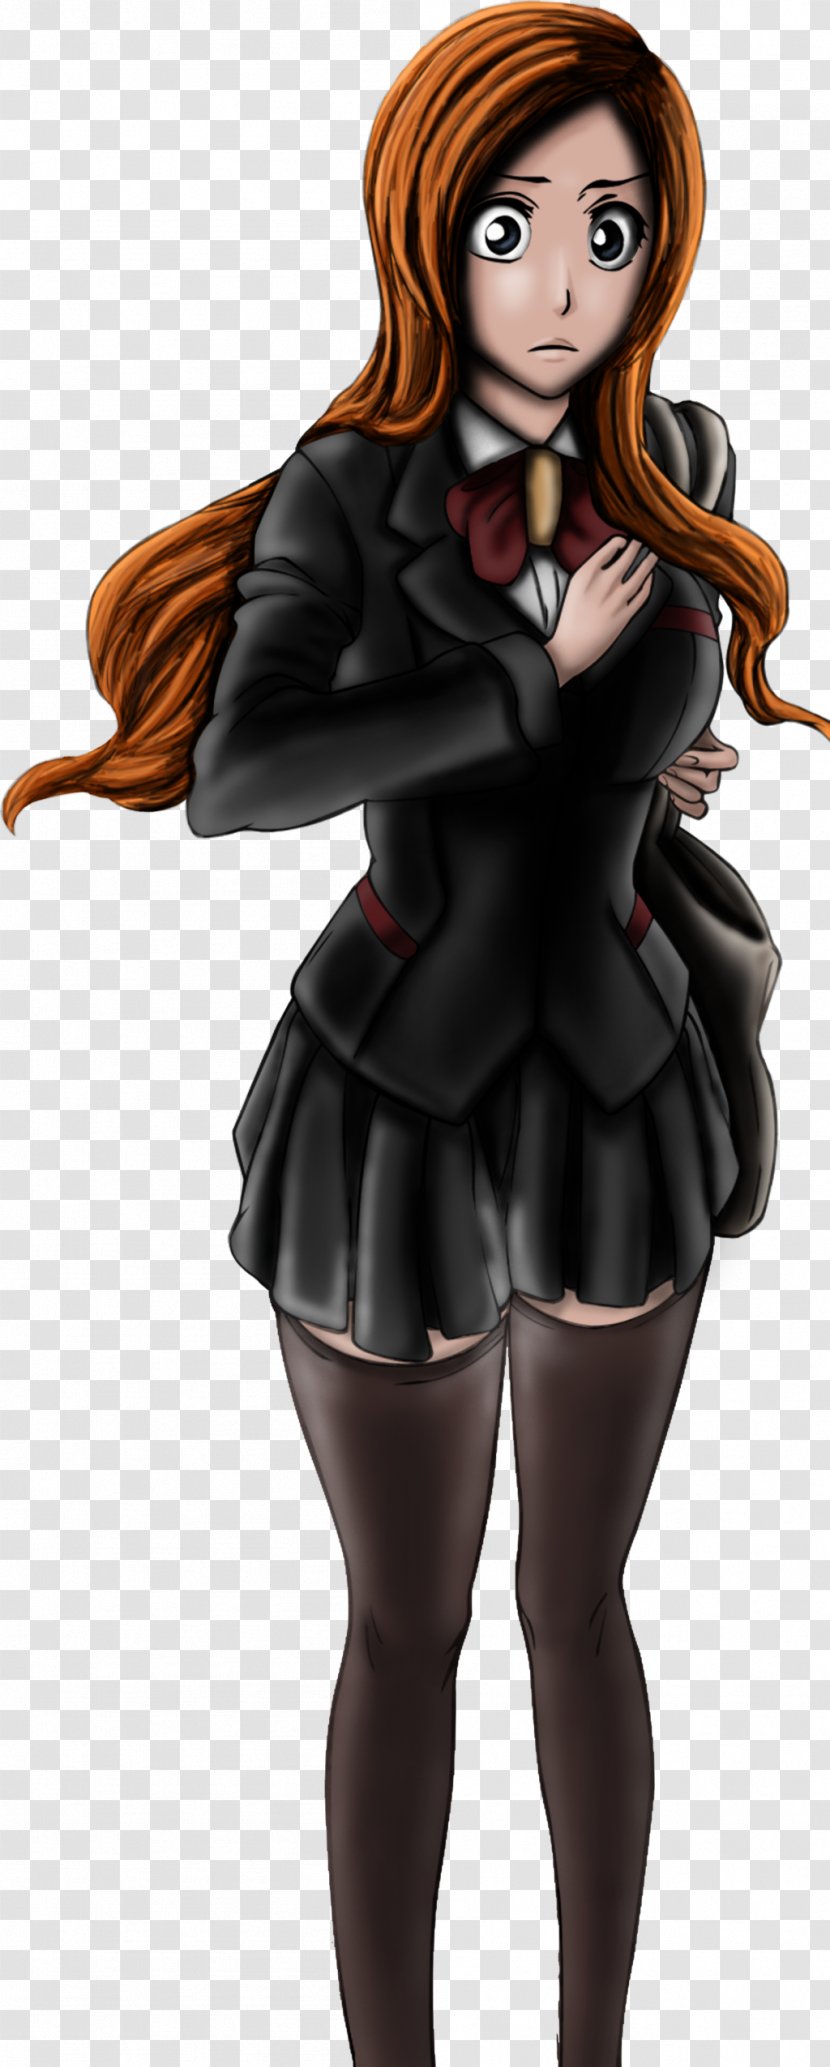 Orihime Inoue Bleach Photography - Silhouette Transparent PNG